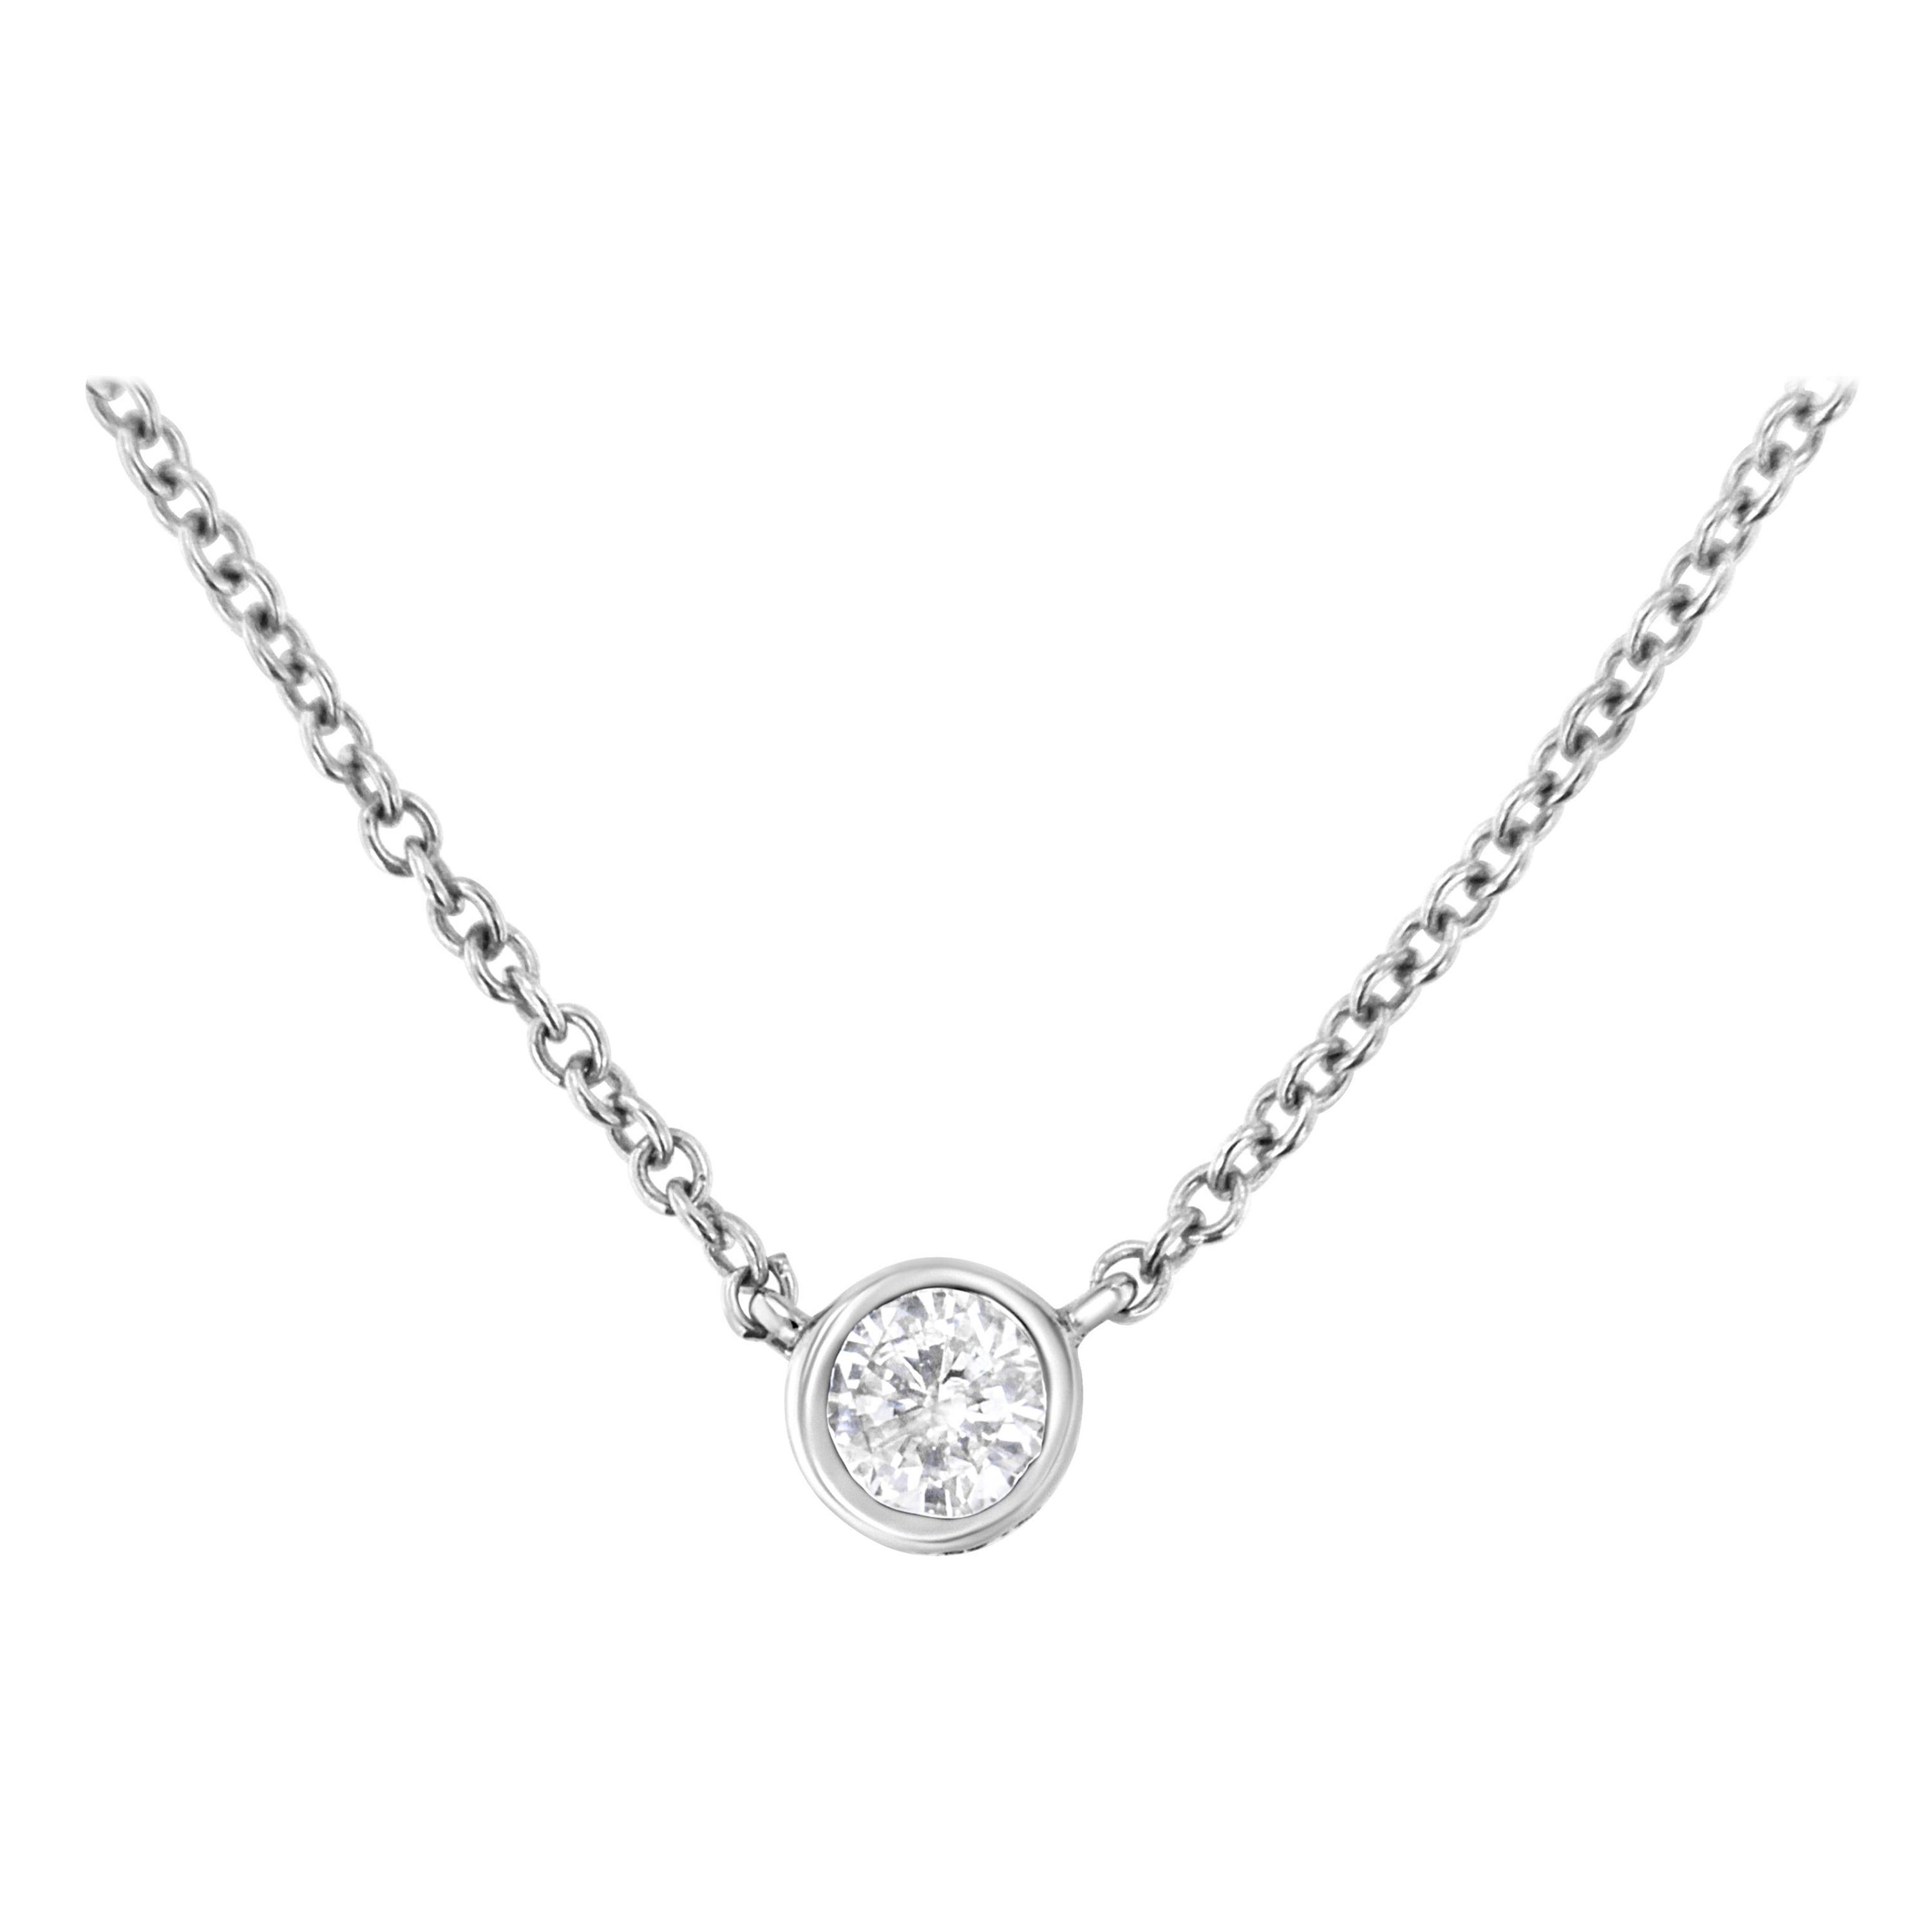 10K Gold 1/10 Carat Diamond Solitaire Pendant Necklace with Adjustable Chain For Sale